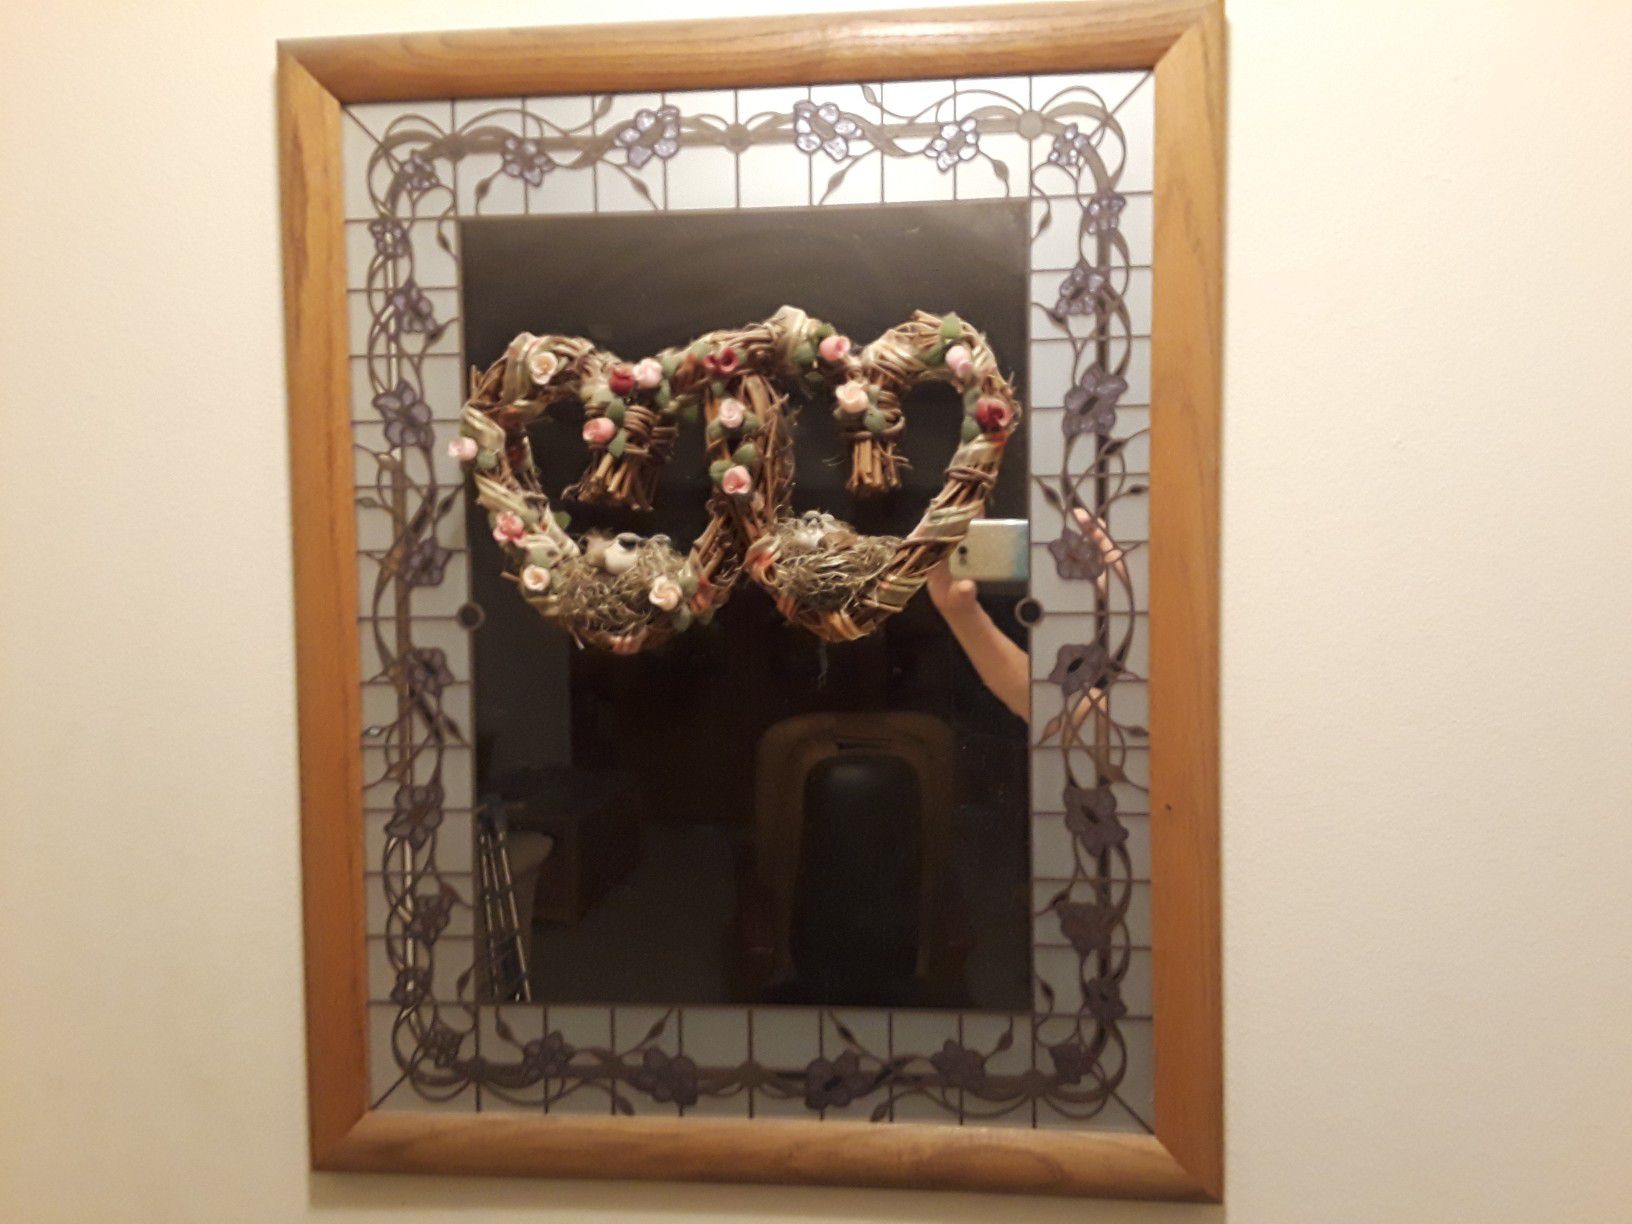 REDUCED TO$20. WOOD FRAMED MIRROR WITH STAINED GLASS BORDER